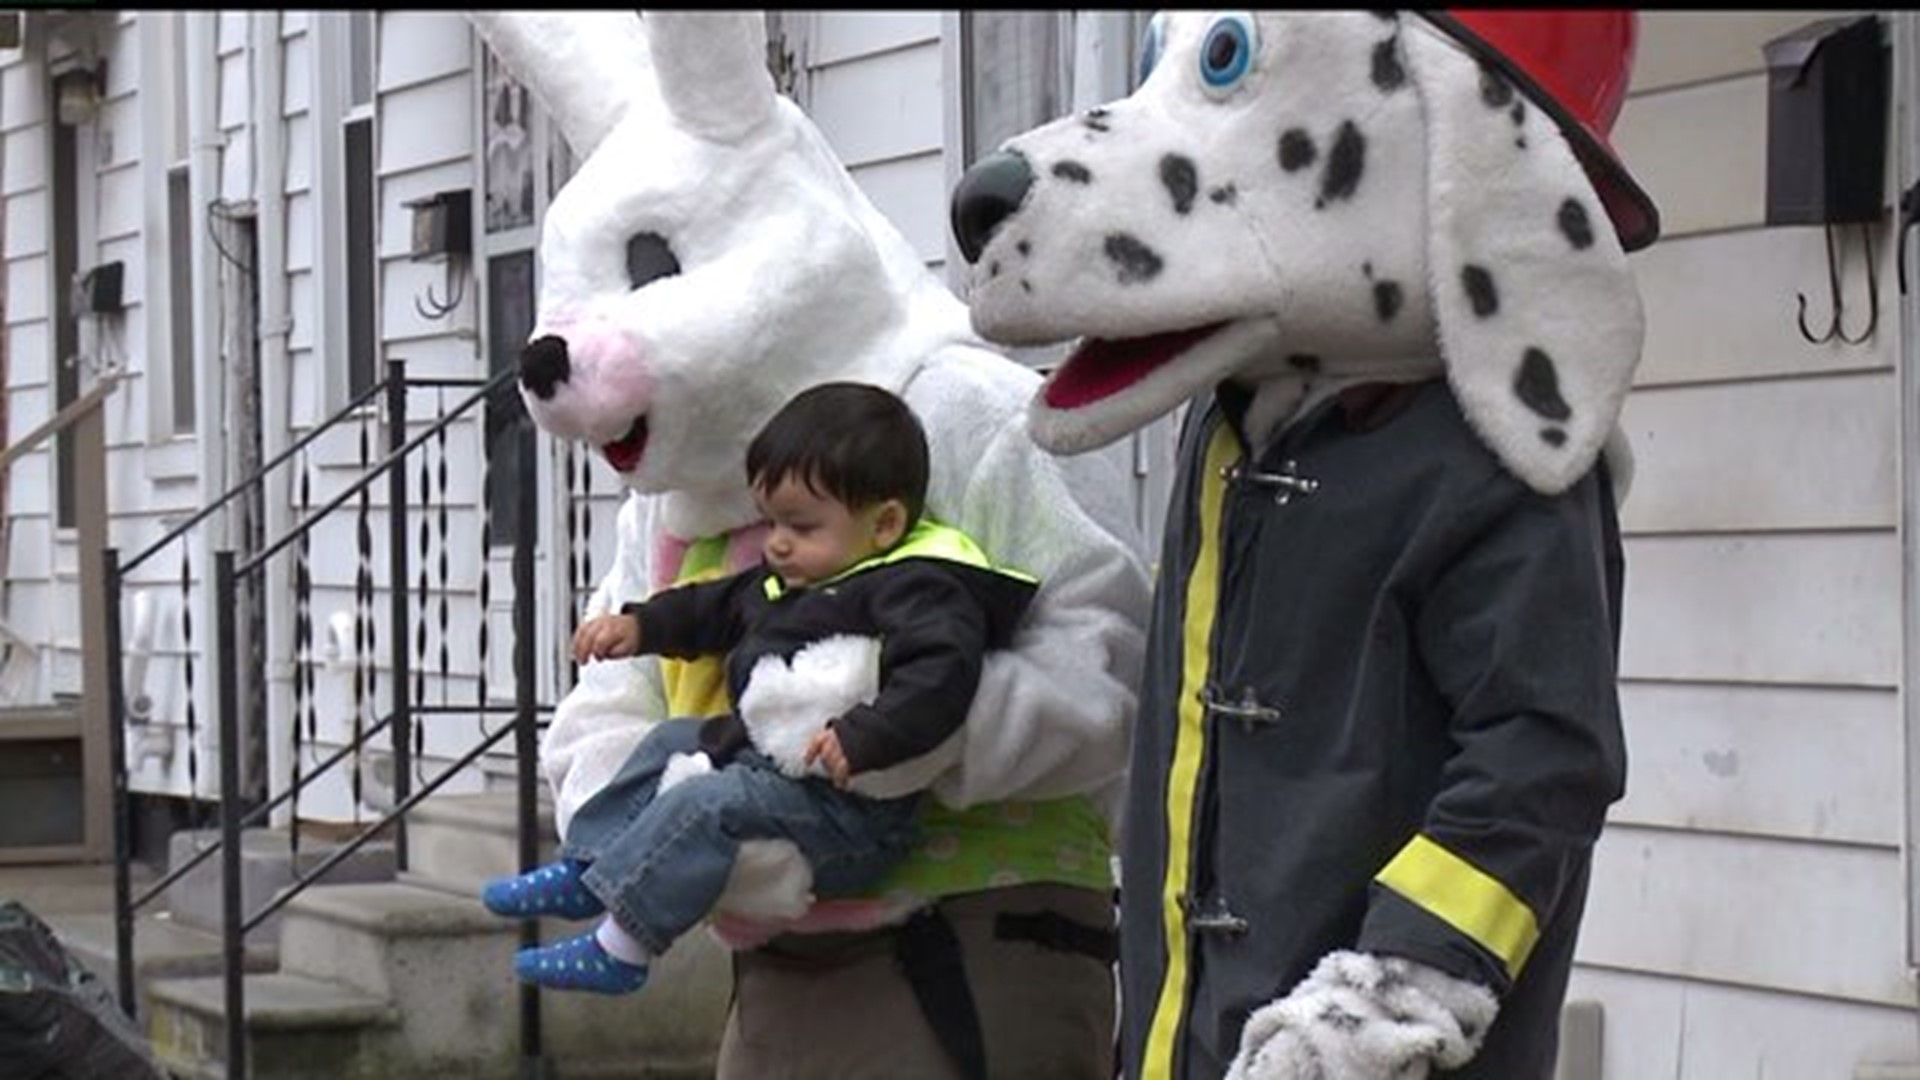 Firefighters dress up as a bunny and dog to deliver Easter meals to taxpayers